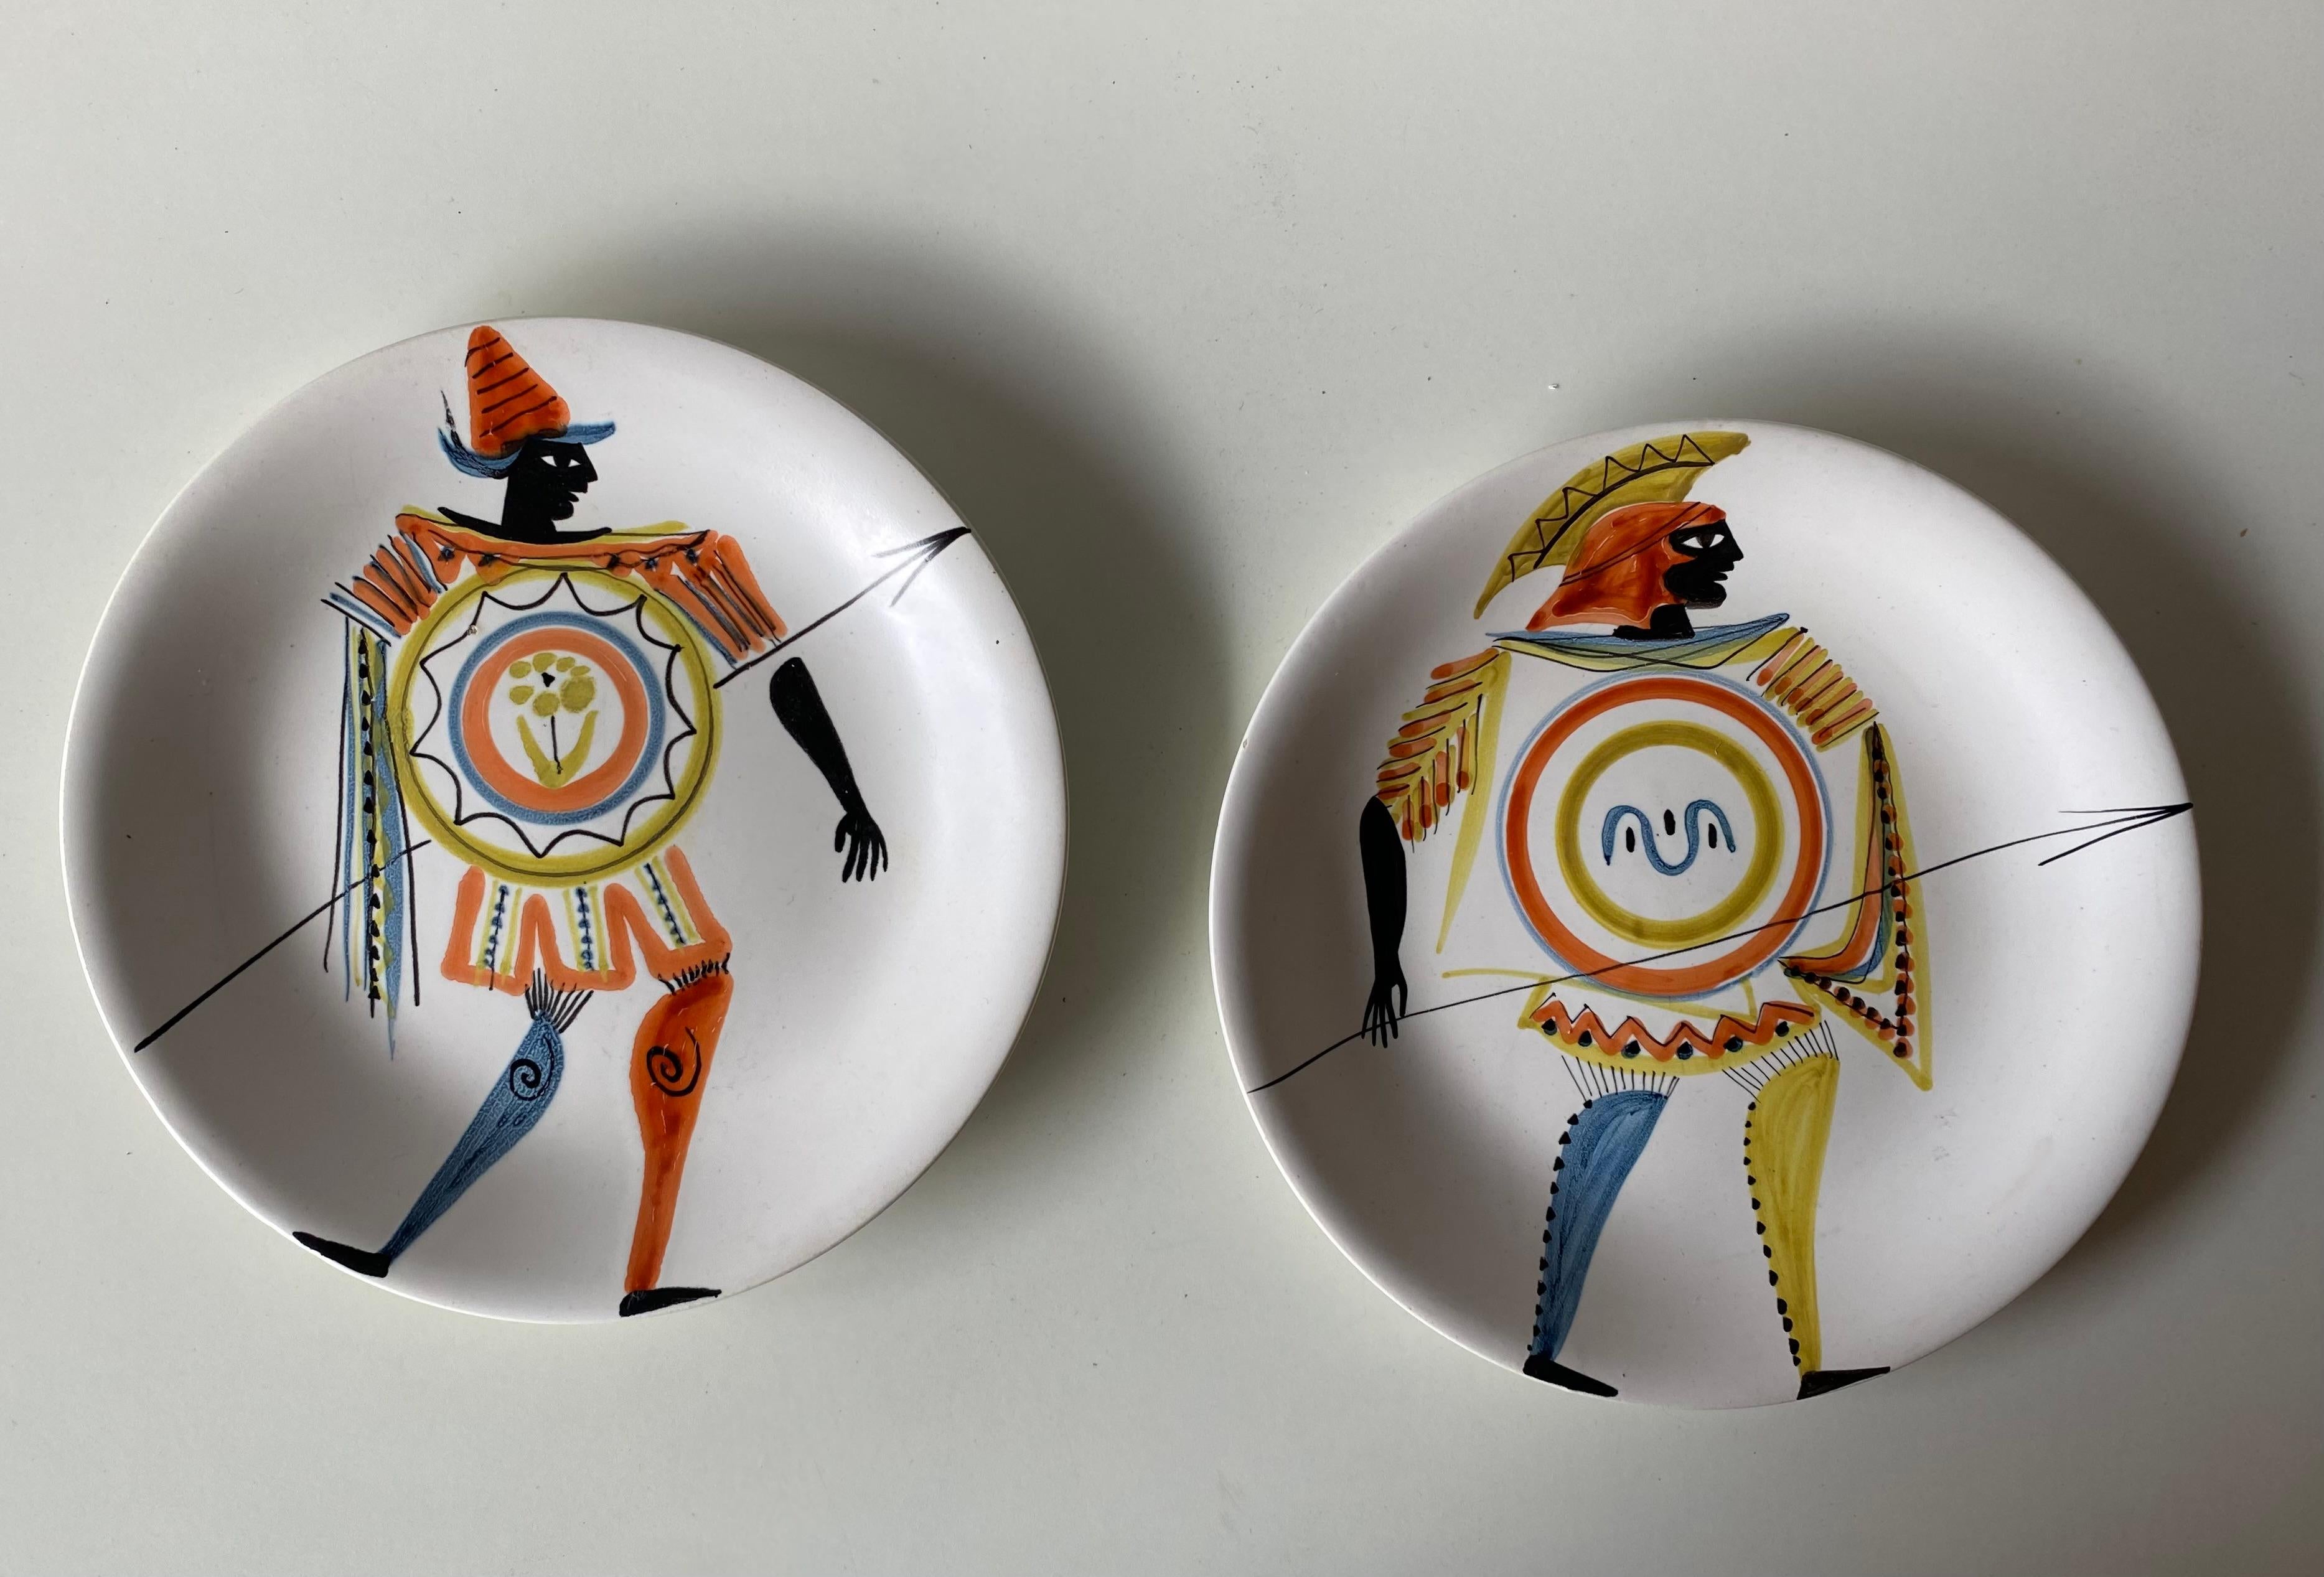 Two Ceramic plates by Roger Capron, Vallauris, France, 1950s.